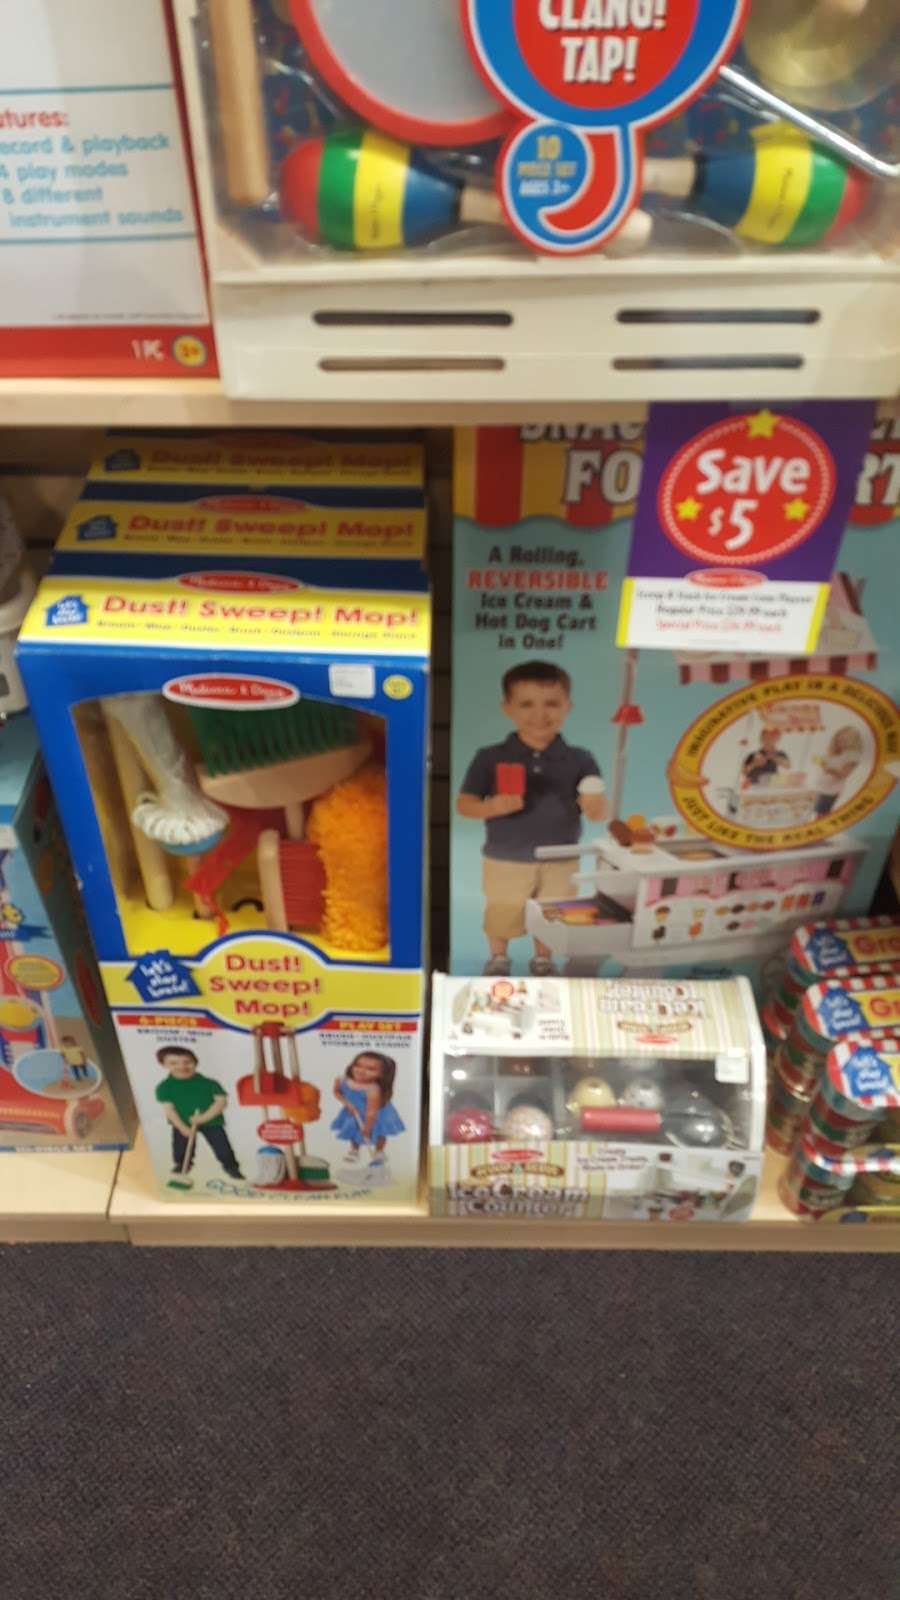 Learning Express Toys of Saucon Valley | The Promenade Shops, 3045 Center Valley Pkwy #106, Center Valley, PA 18034, USA | Phone: (610) 798-7700